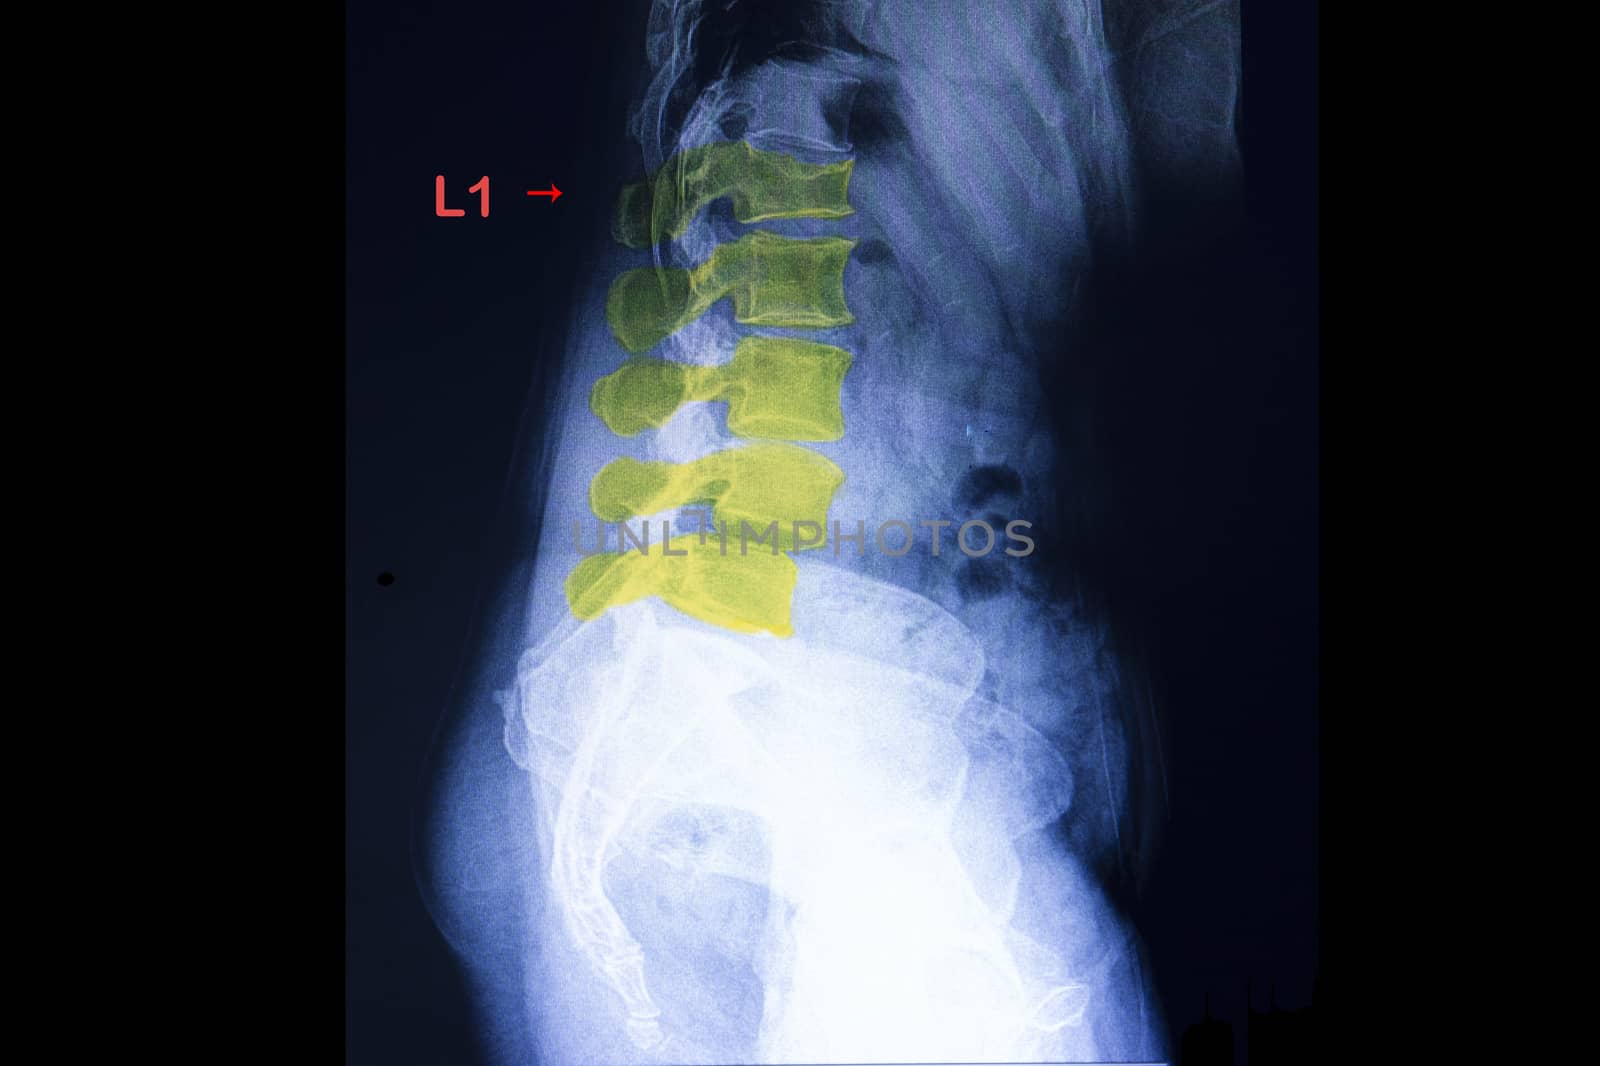 Xray film of a patient with back pain showing anterior spondylolithesis of L4 on L5 and compression fracture of L1 vertebral body. A case of abnormal x ray.